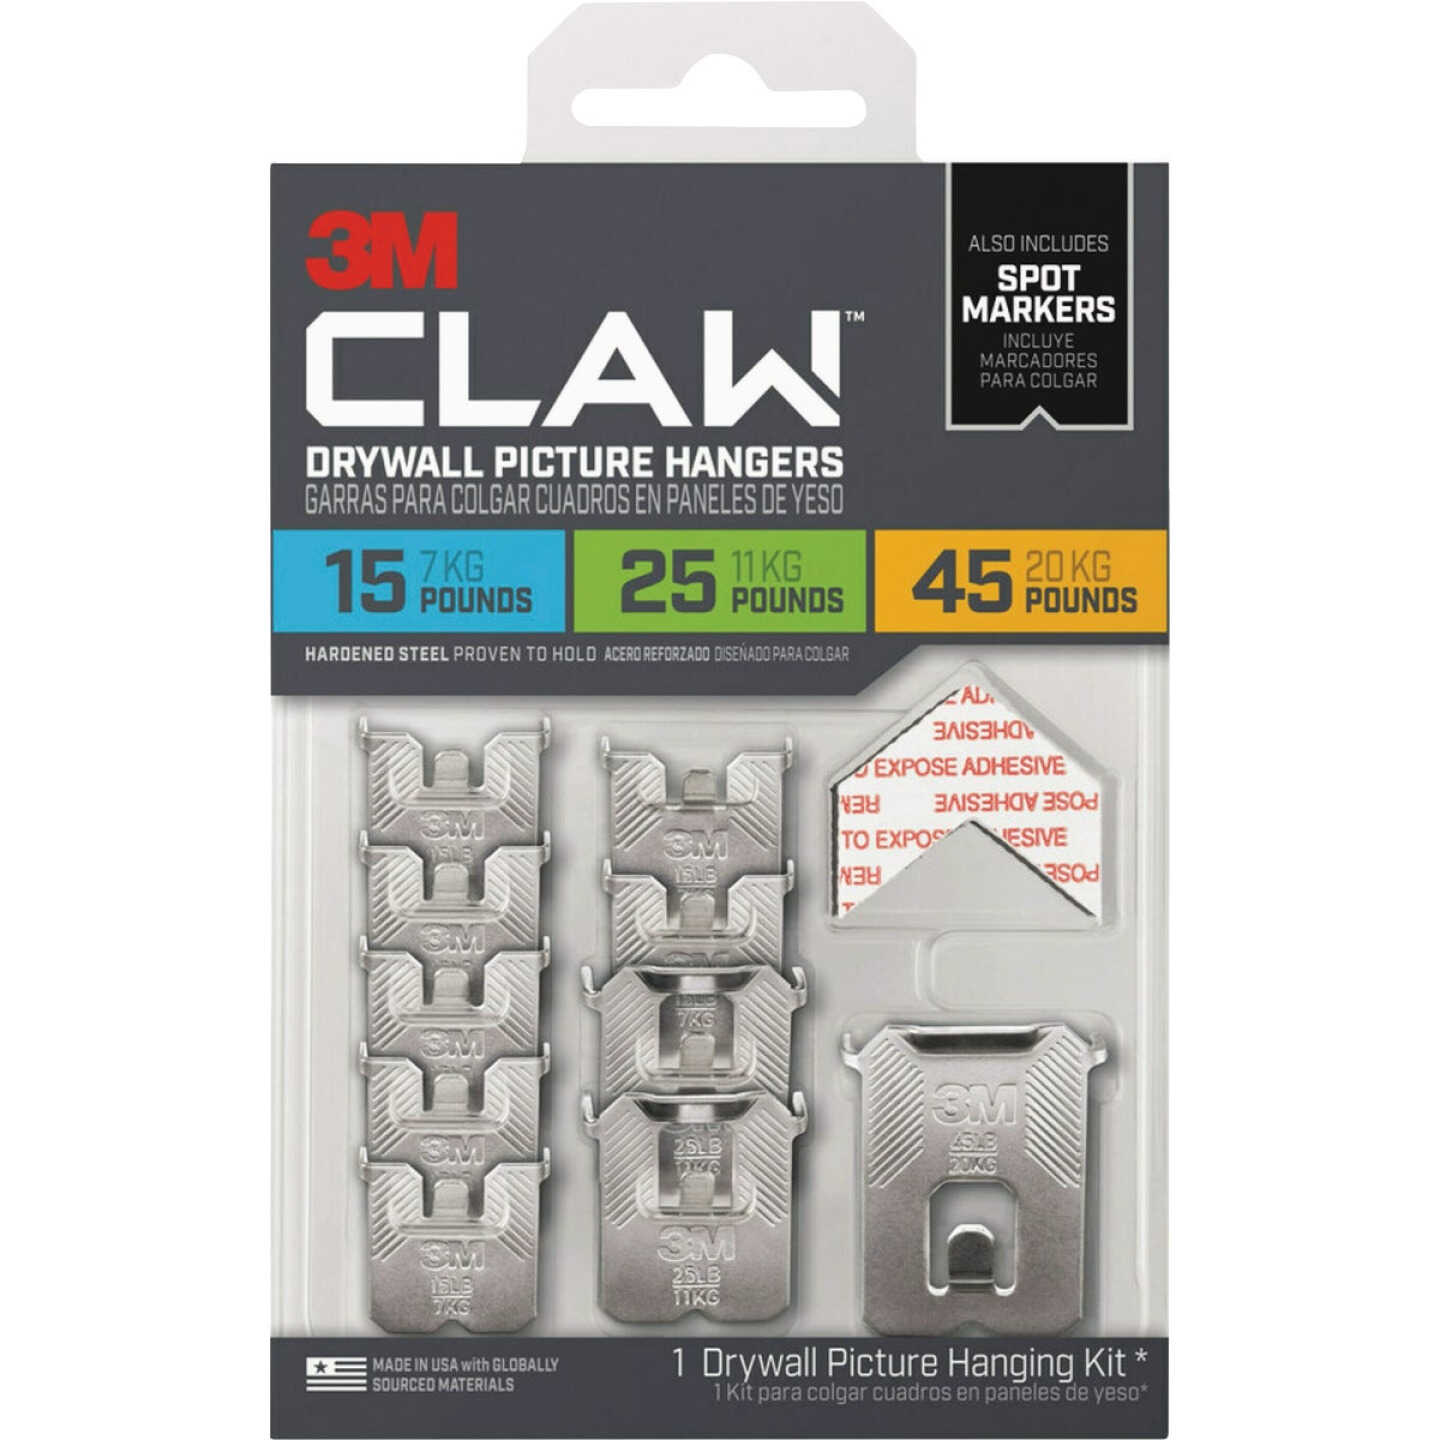 3M Claw Drywall Picture Hanger Variety Pack with Spot Markers - Power  Townsend Company